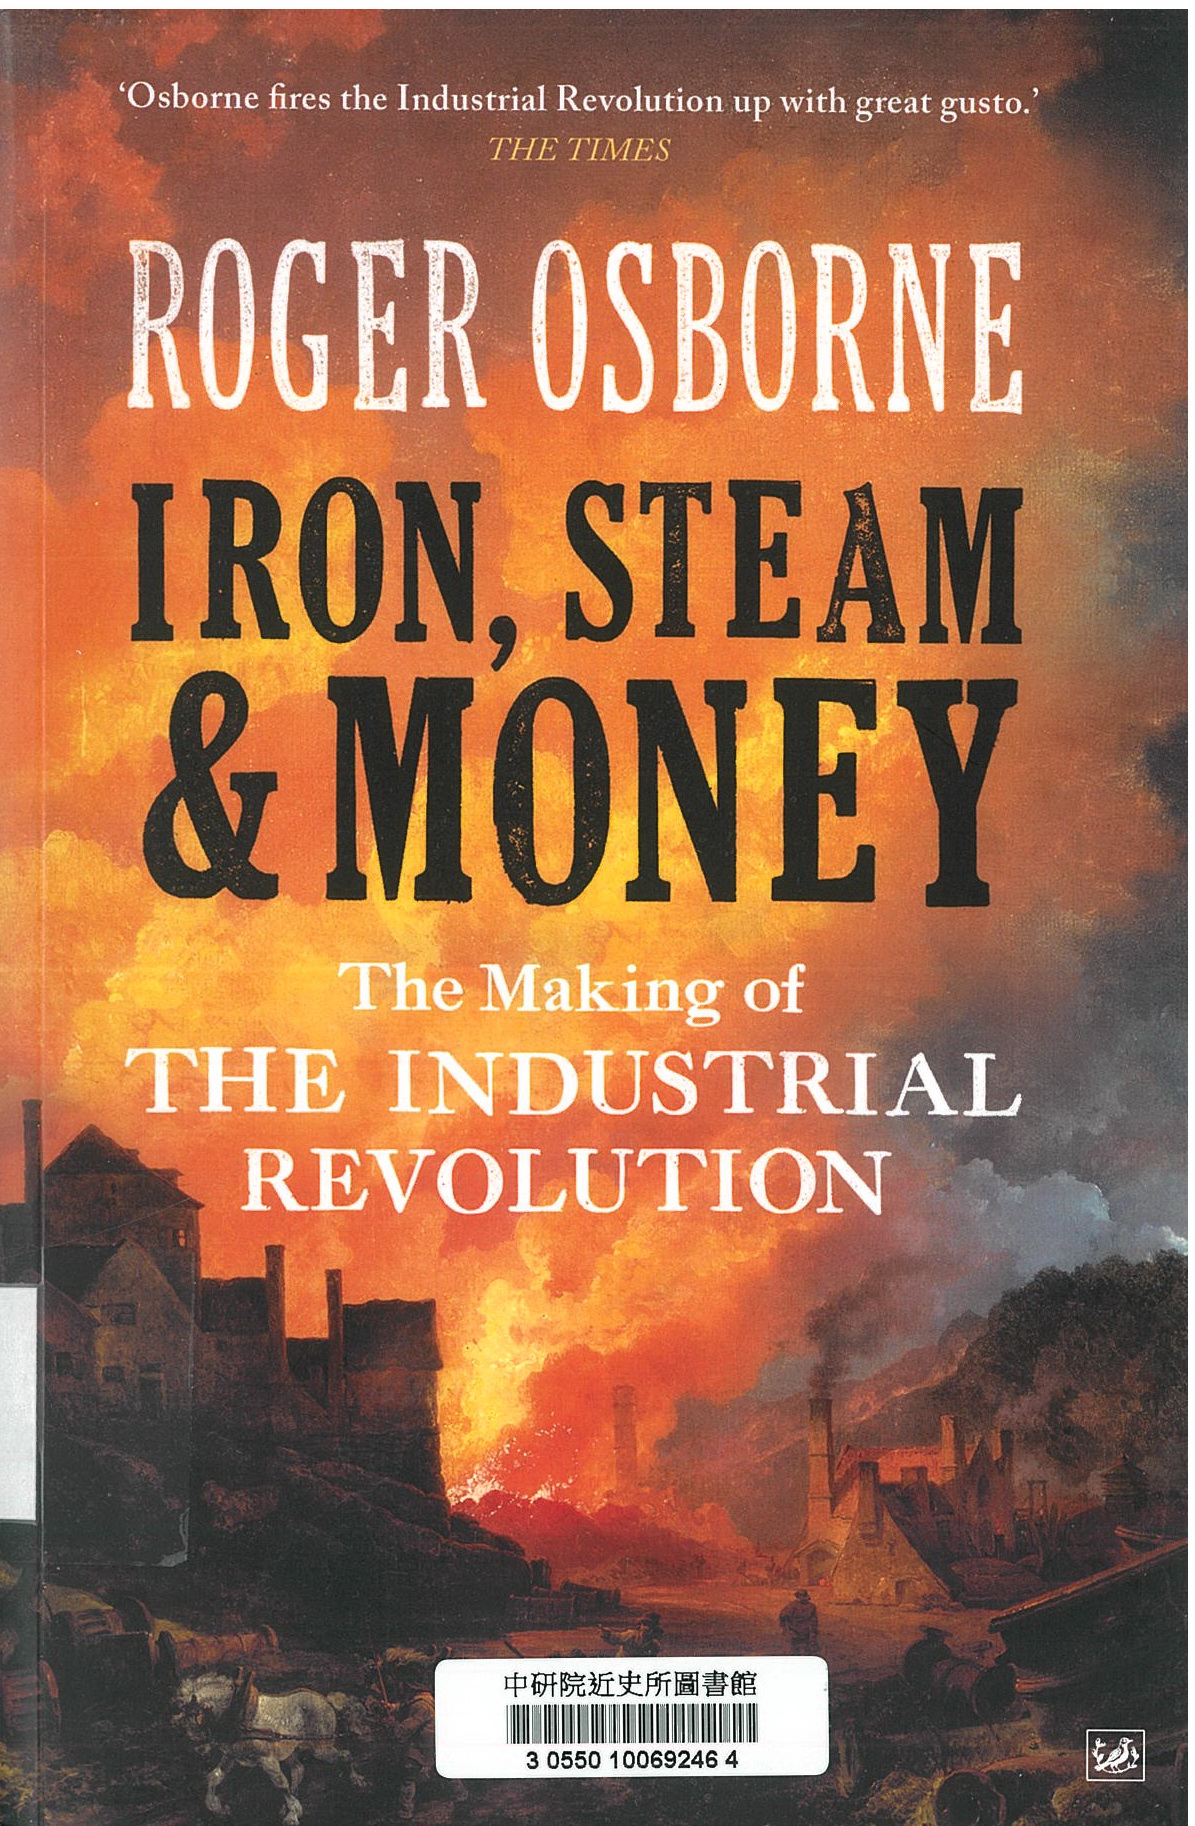 Iron, steam & money : the making of the industrial revolution